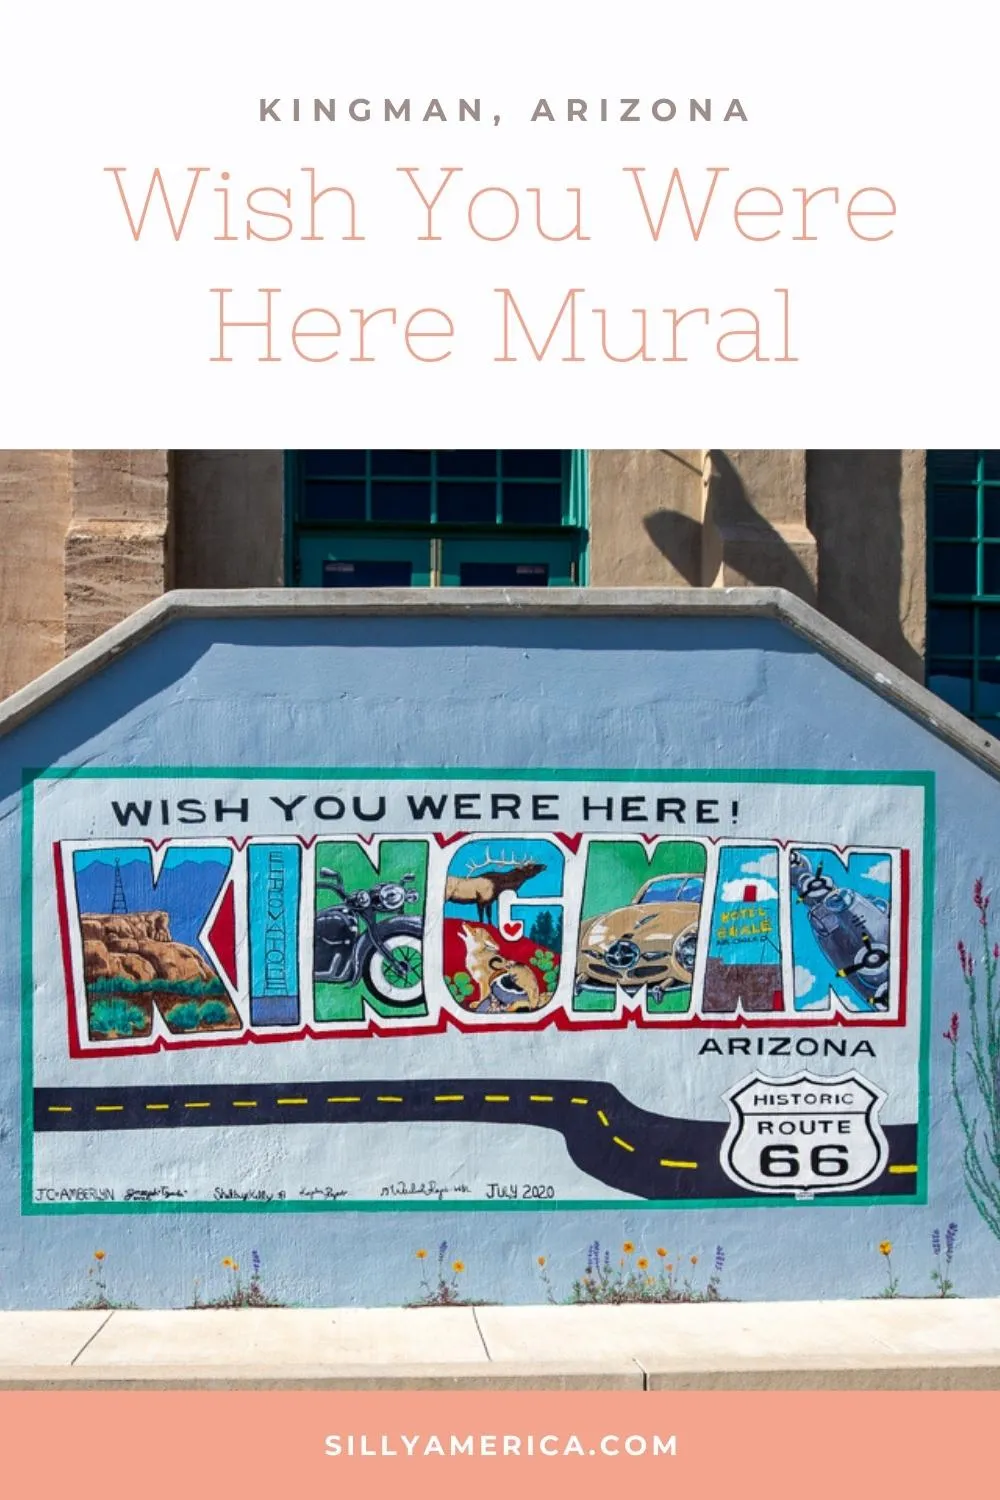 Welcome to Kingman, Arizona. Wish you were here! If you're stopping in town on your Route 66 road trip you'll surely feel this sentiment. So stop over at the Powerhouse Visitor Center to take some selfies with the Wish You Were Here Mural in Kingman, Arizona. The Wish You Were Here mural was designed by artist JC Amberlyn and was completed by four young local artists in 2020. You can find it on the side of the Powerhouse Visitor Center, which is home to the Kingman Route 66 museum. #Route66